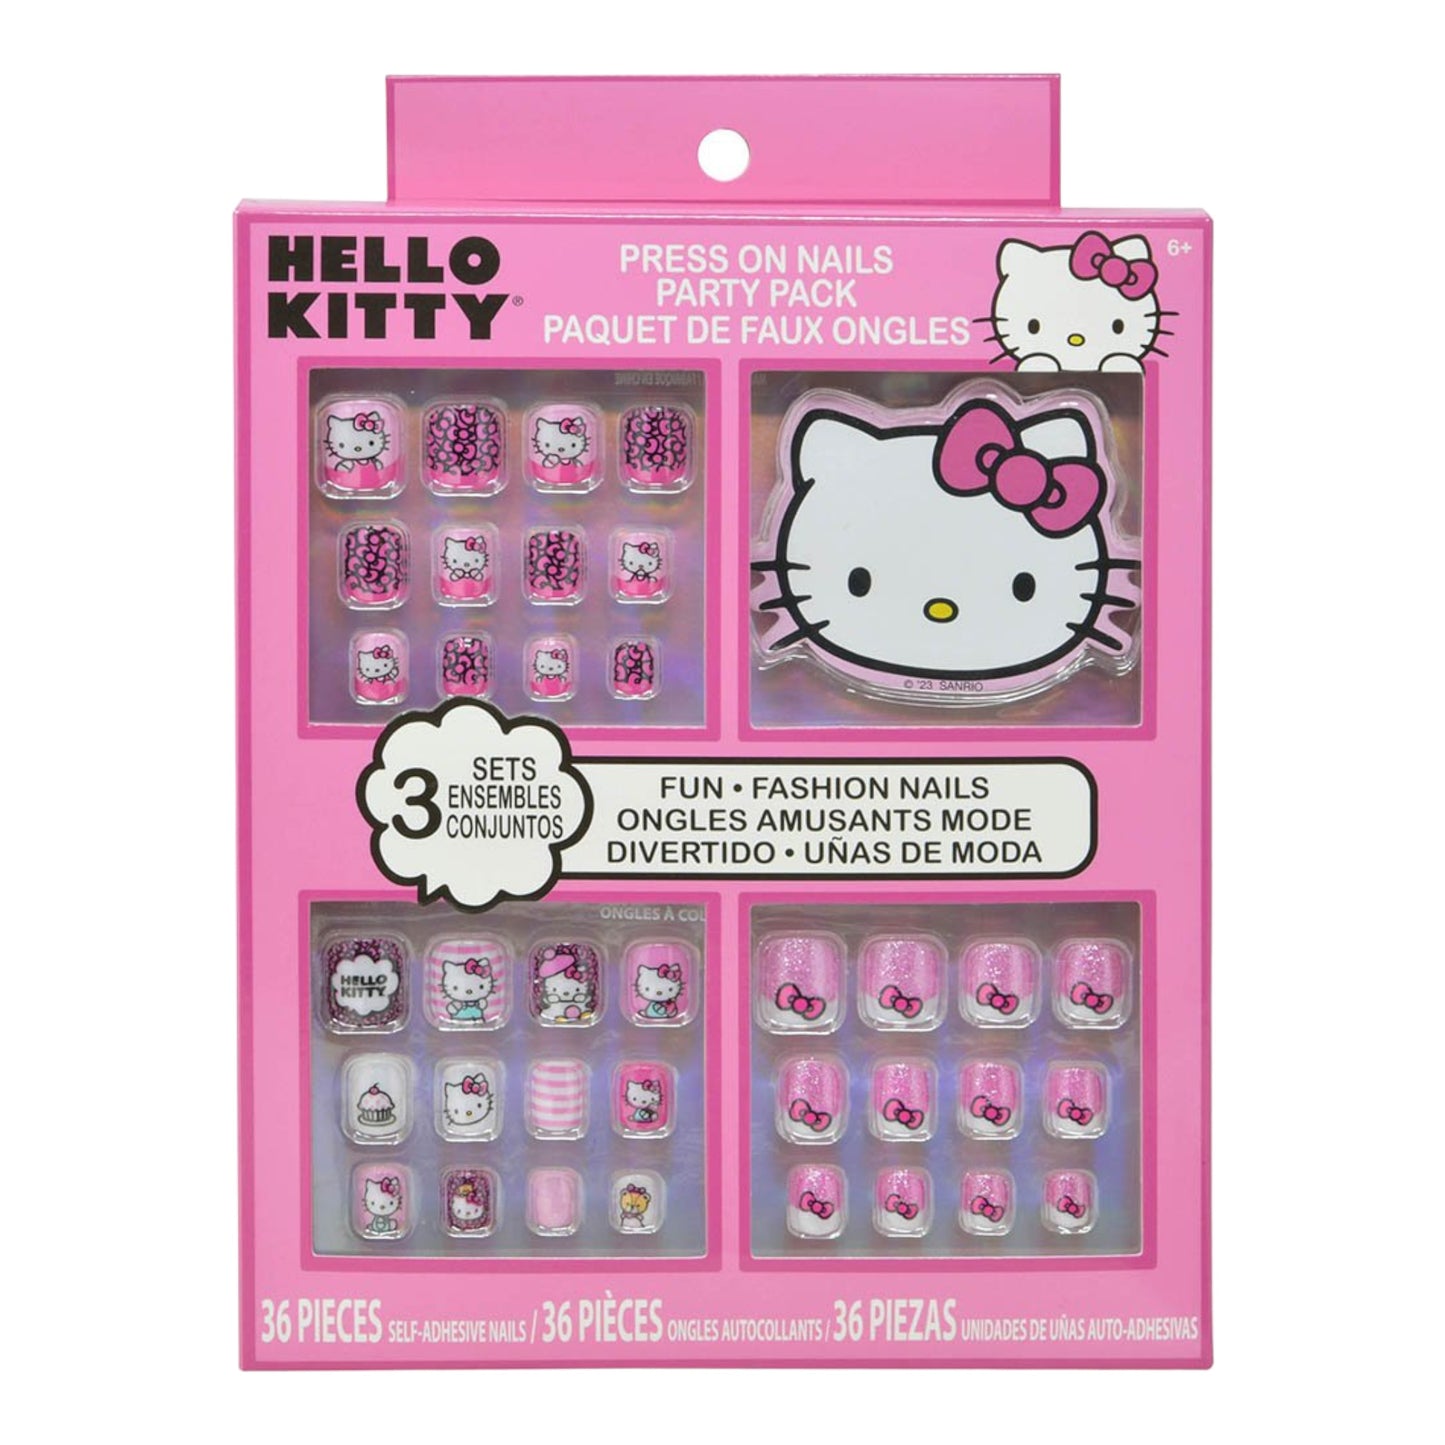 HELLO KITTY PRESS ON NAILS PARTY PACK UPDHK1150GG BR106